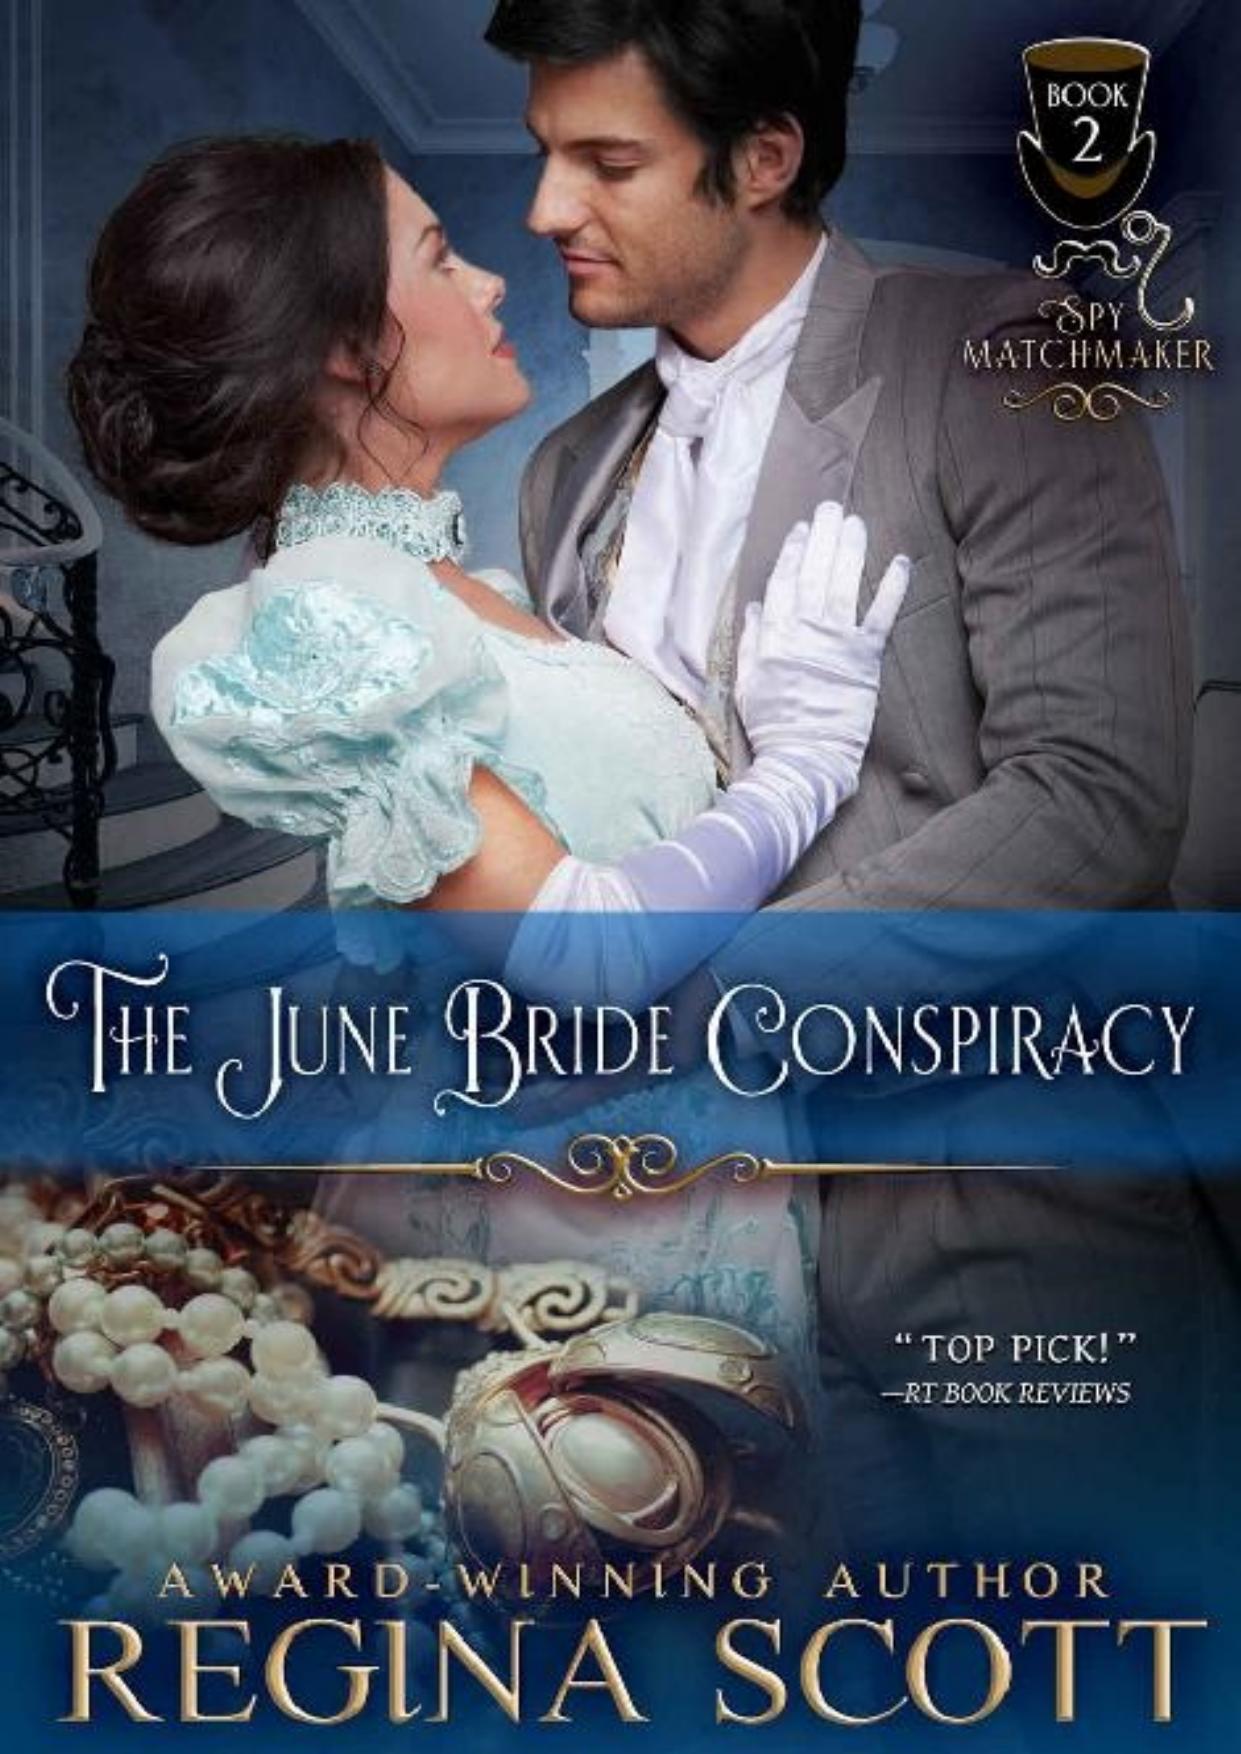 The June Bride Conspiracy (The Spy Matchmaker Book 2)